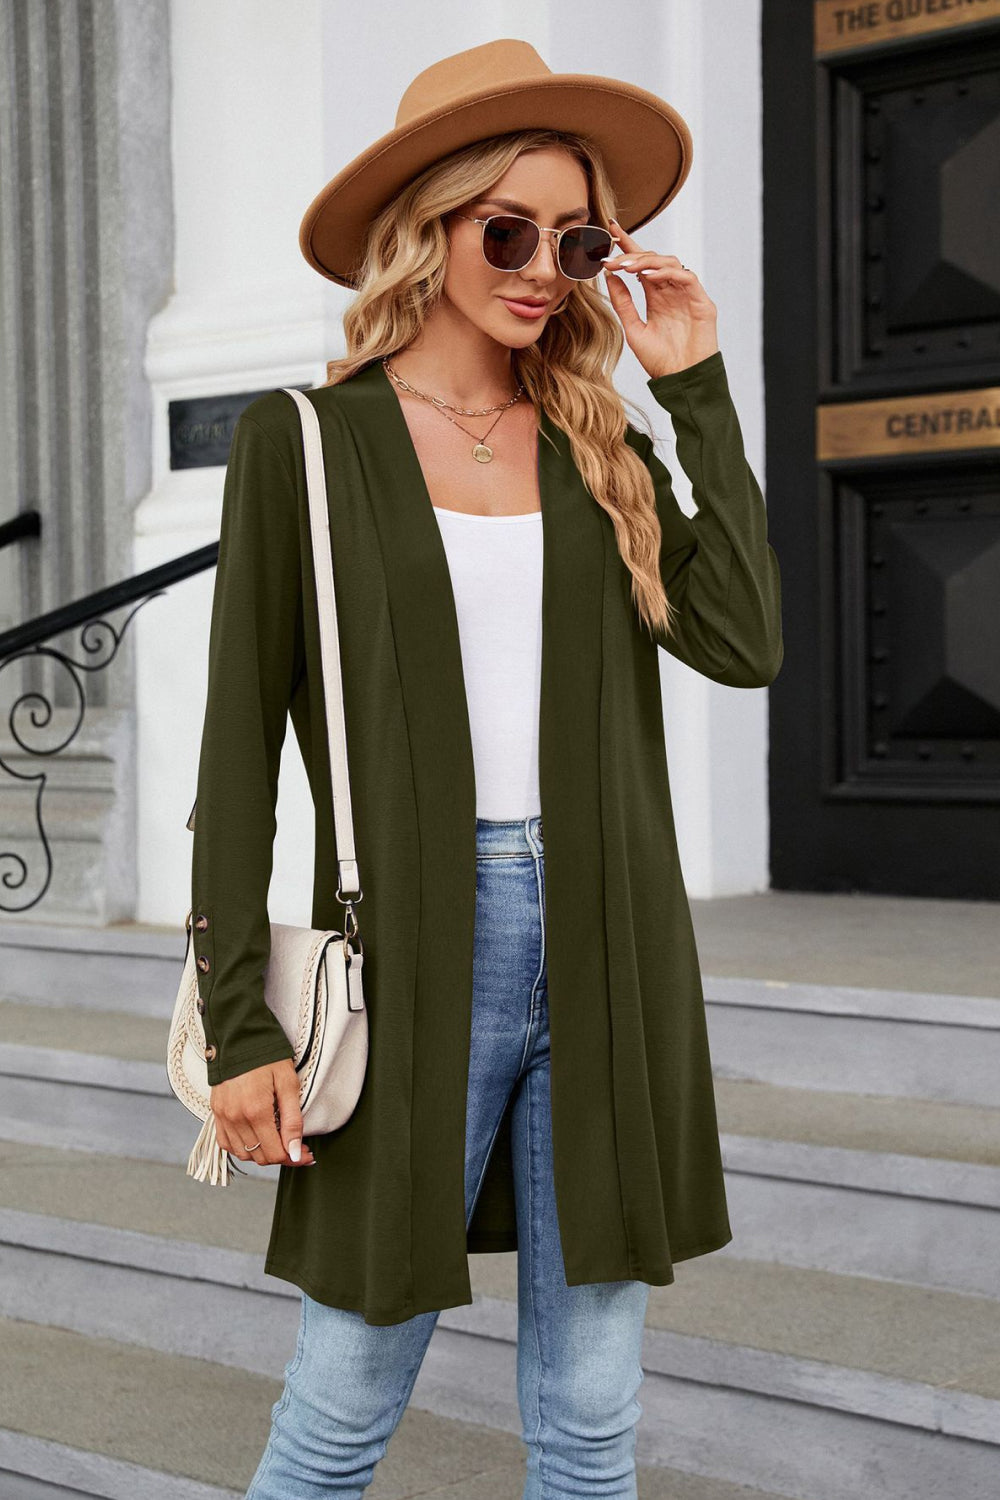 Long Sleeve Open Front Cardigan - Green / S - Women’s Clothing & Accessories - Shirts & Tops - 16 - 2024